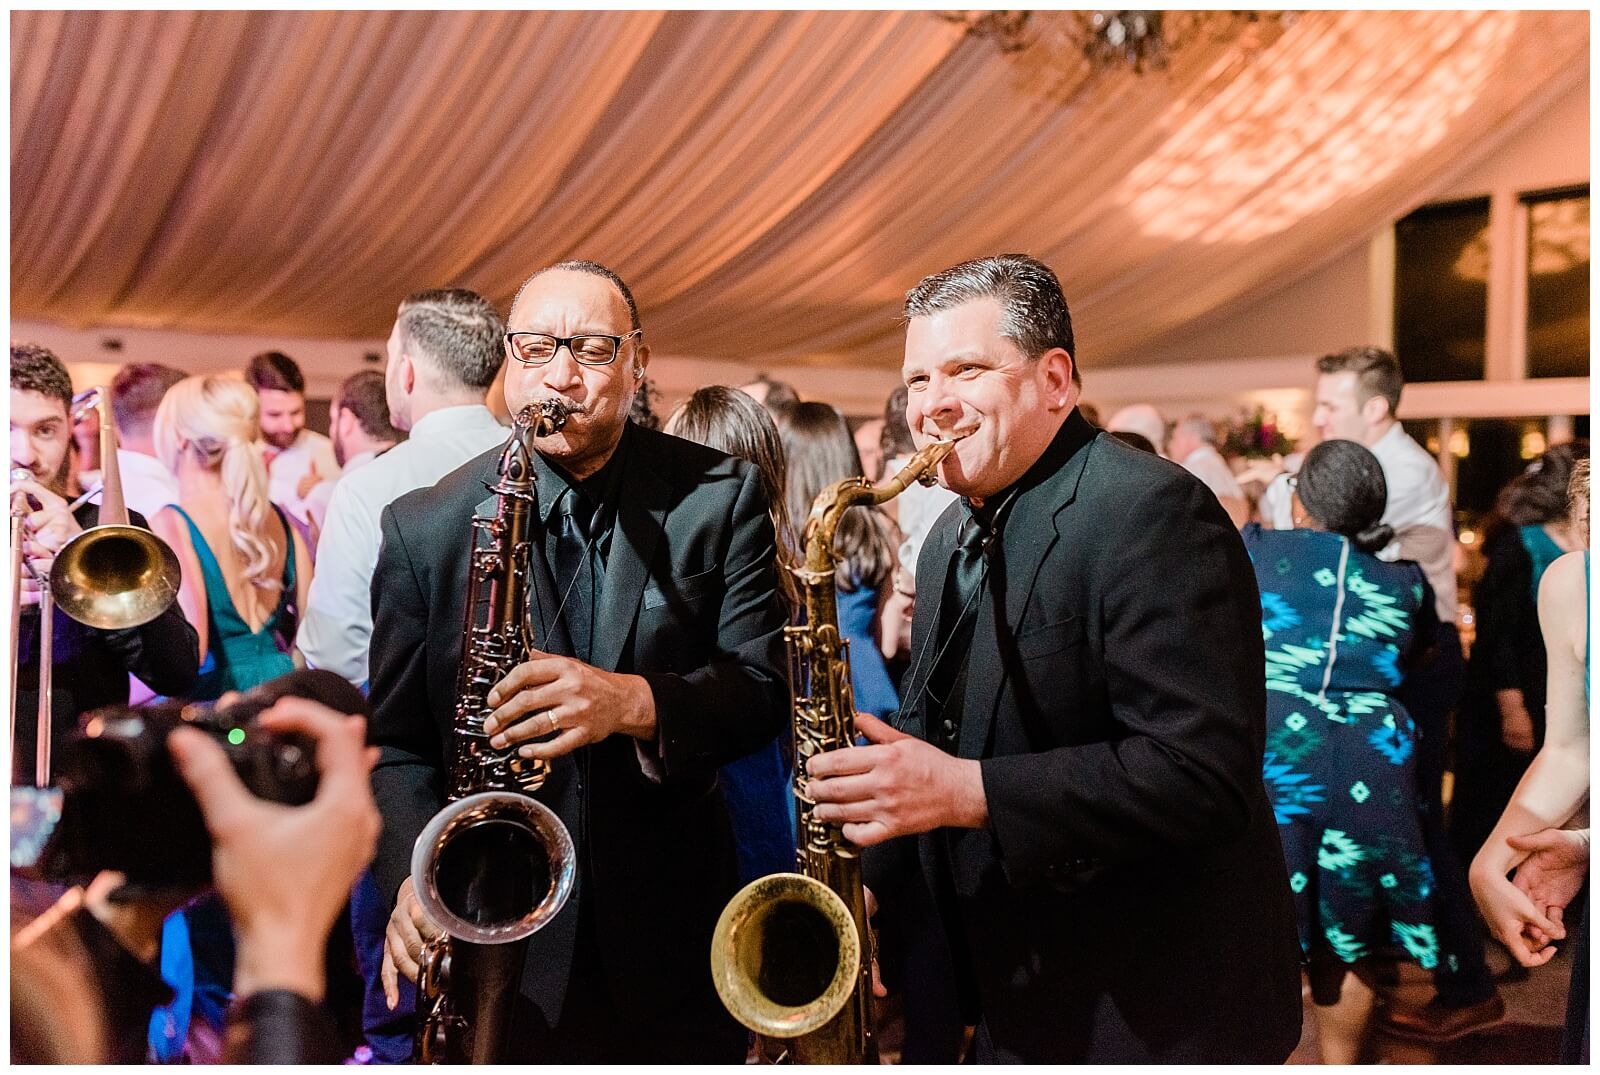 Two men playing saxophones, enhancing the wedding experience at a reception.